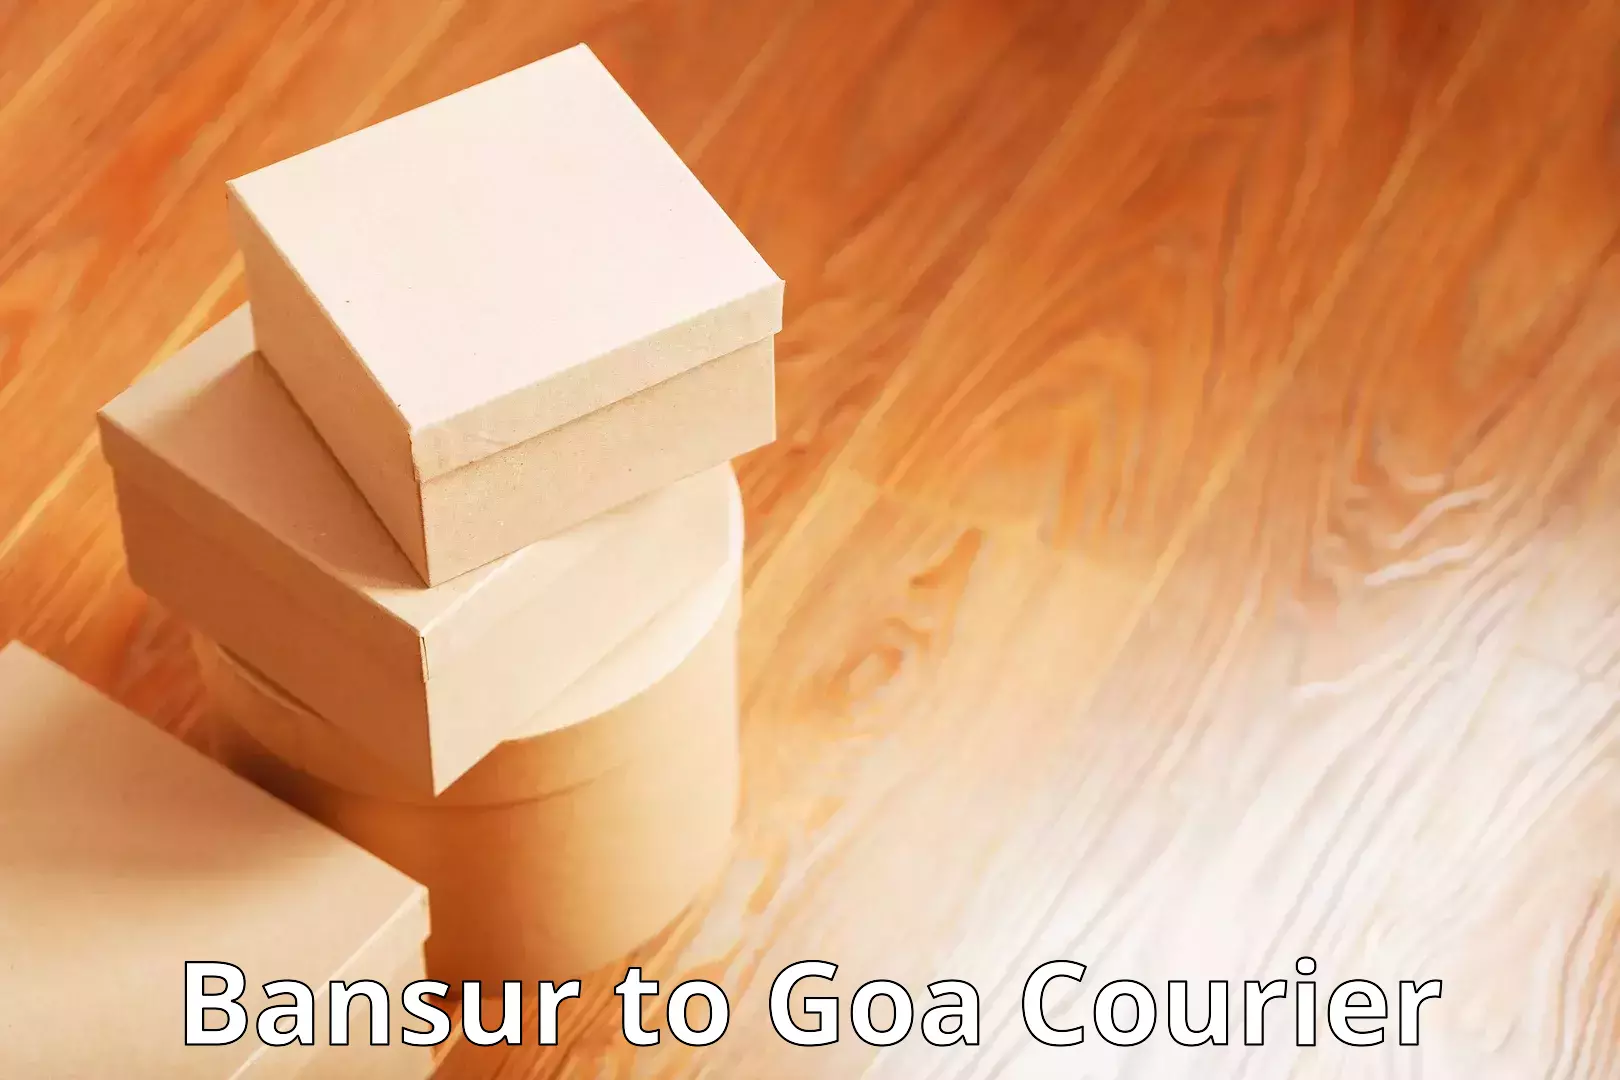 User-friendly delivery service Bansur to Goa